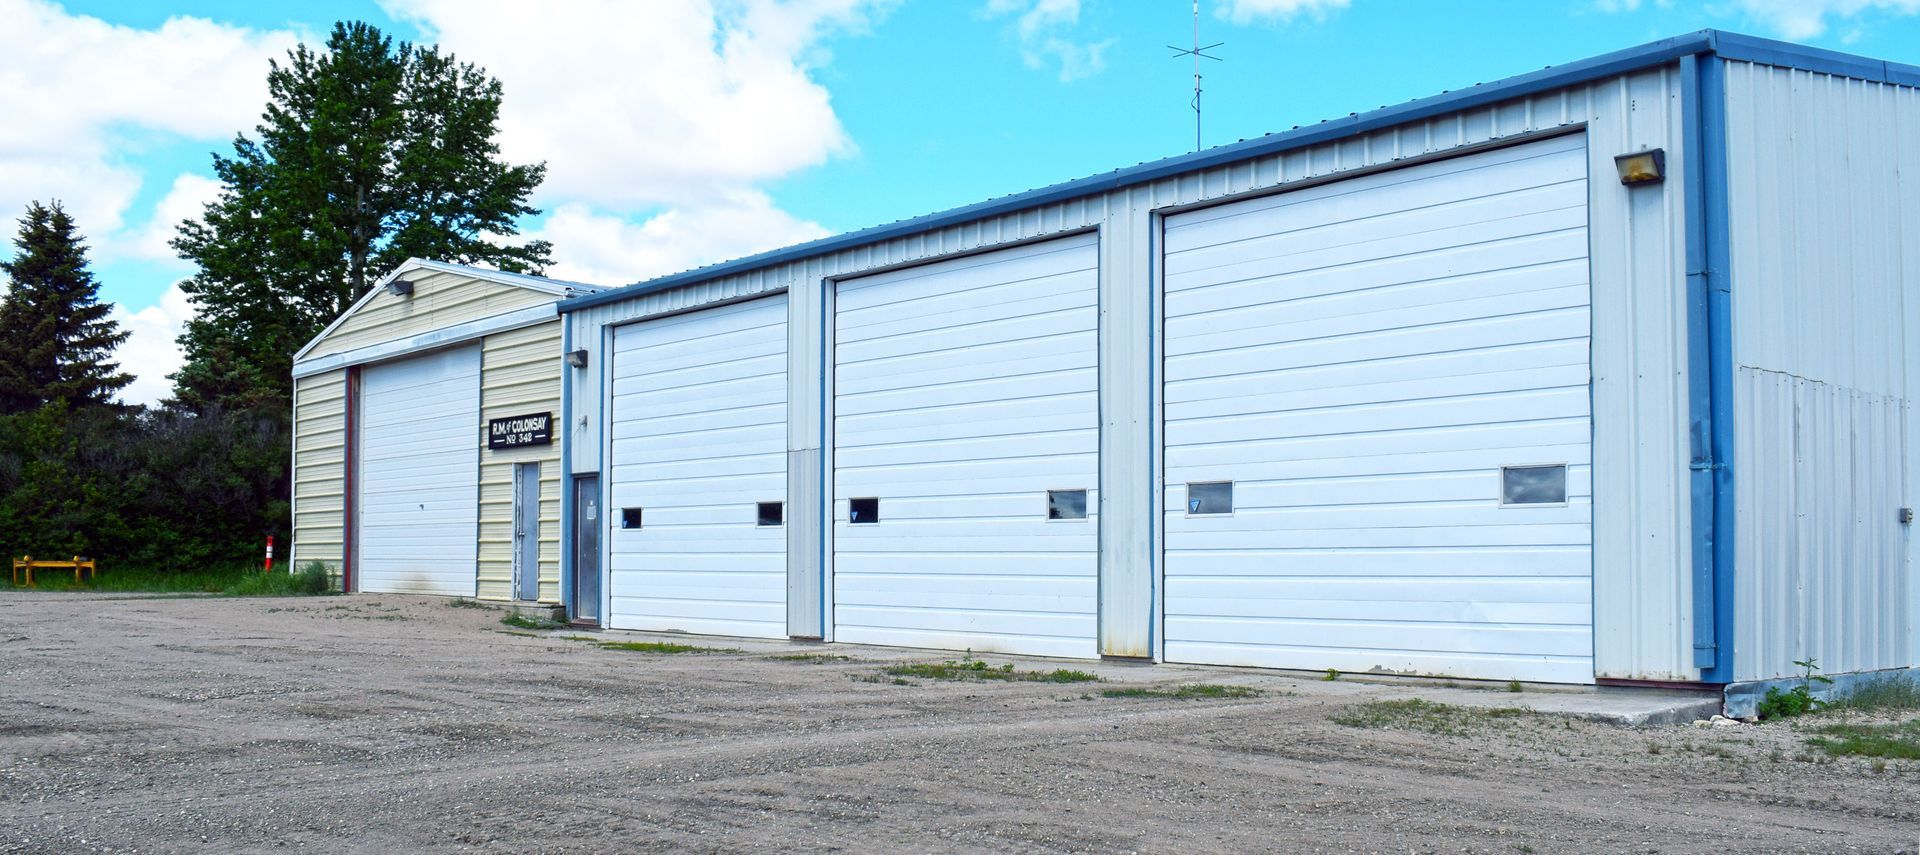 A row of white garage doors are lined up in a parking lot.